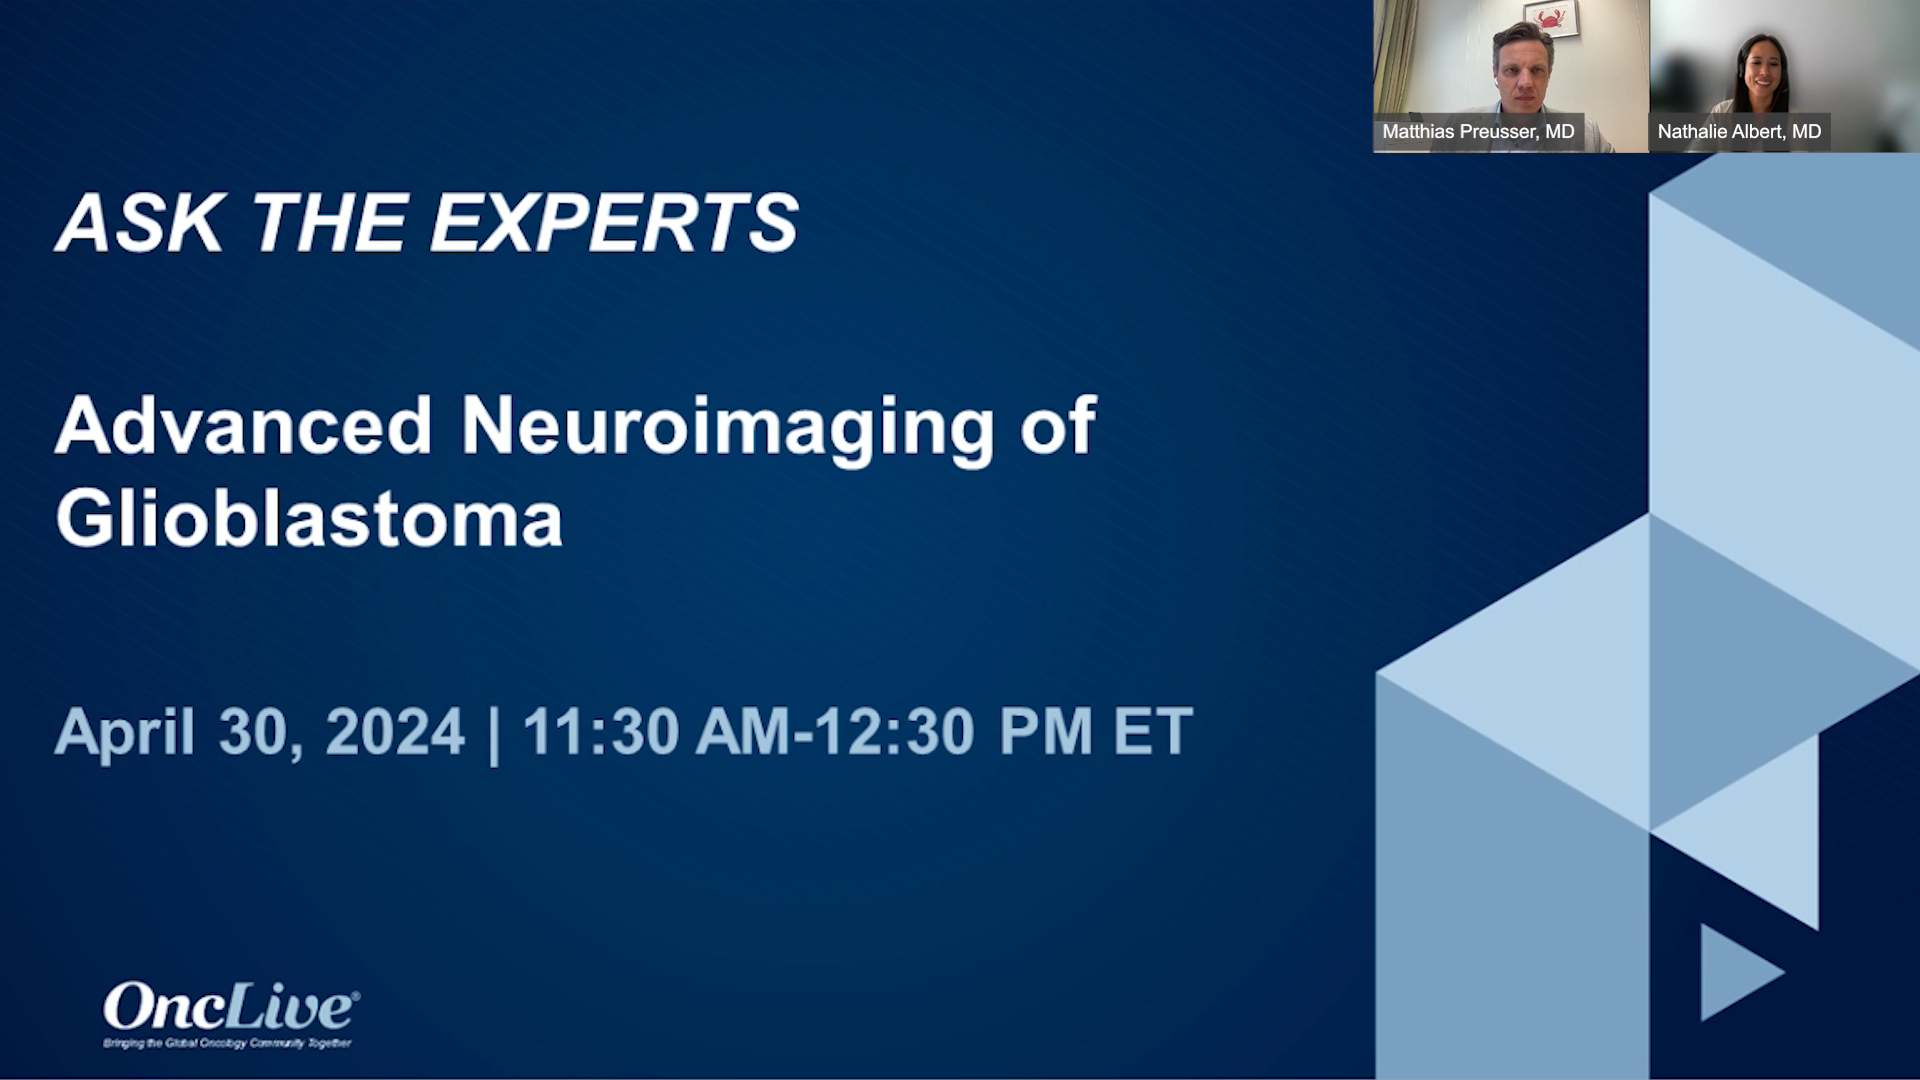 Video 2 - "Navigating Glioblastoma Imaging: The Patient Journey from Diagnosis to Treatment "